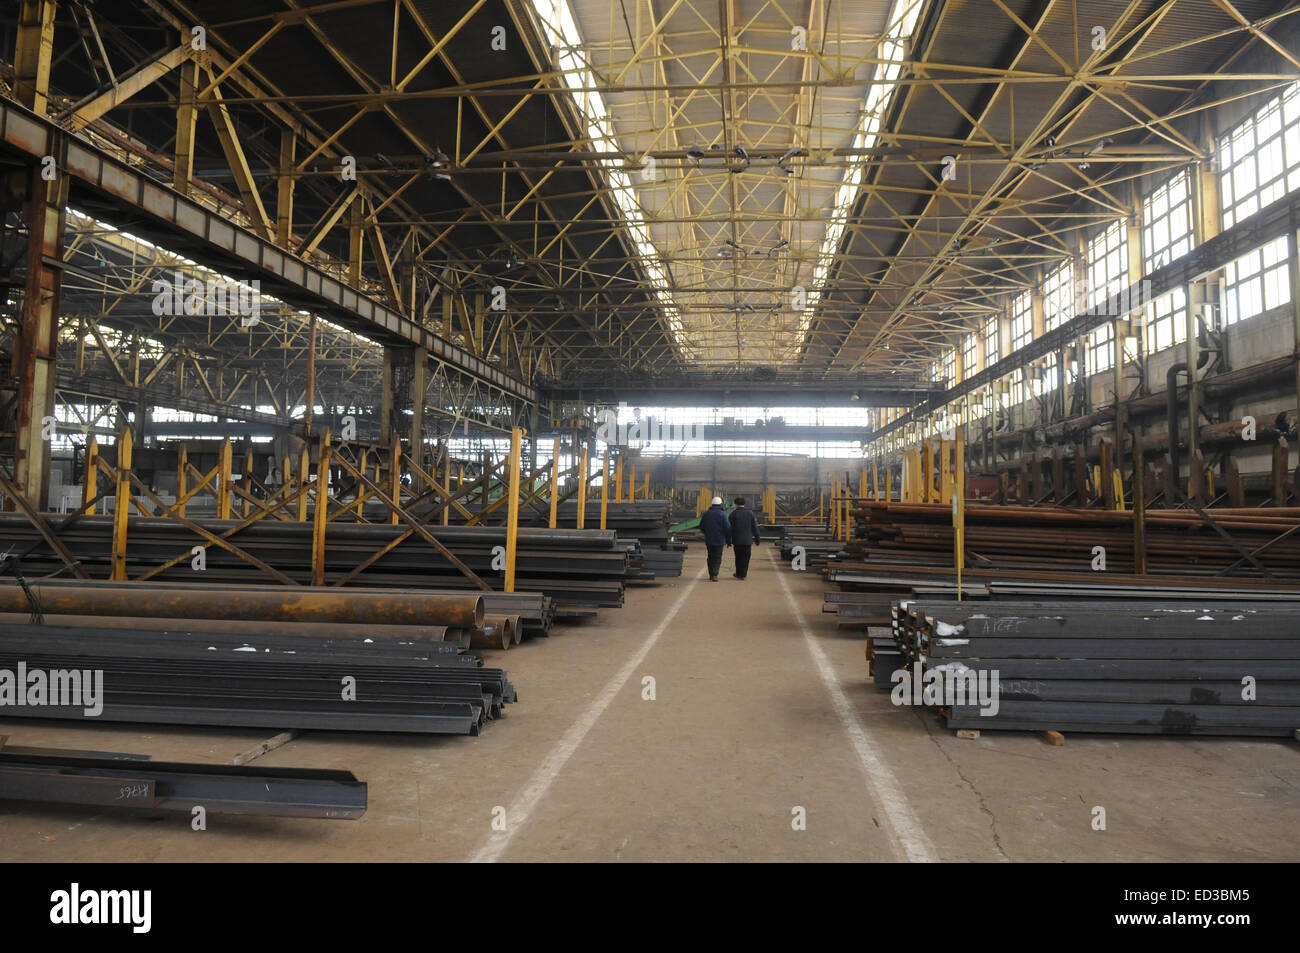 Rambling shop floor is made as steel construction. This production department makes a specialty out of metalworks manufacturing. Stock Photo